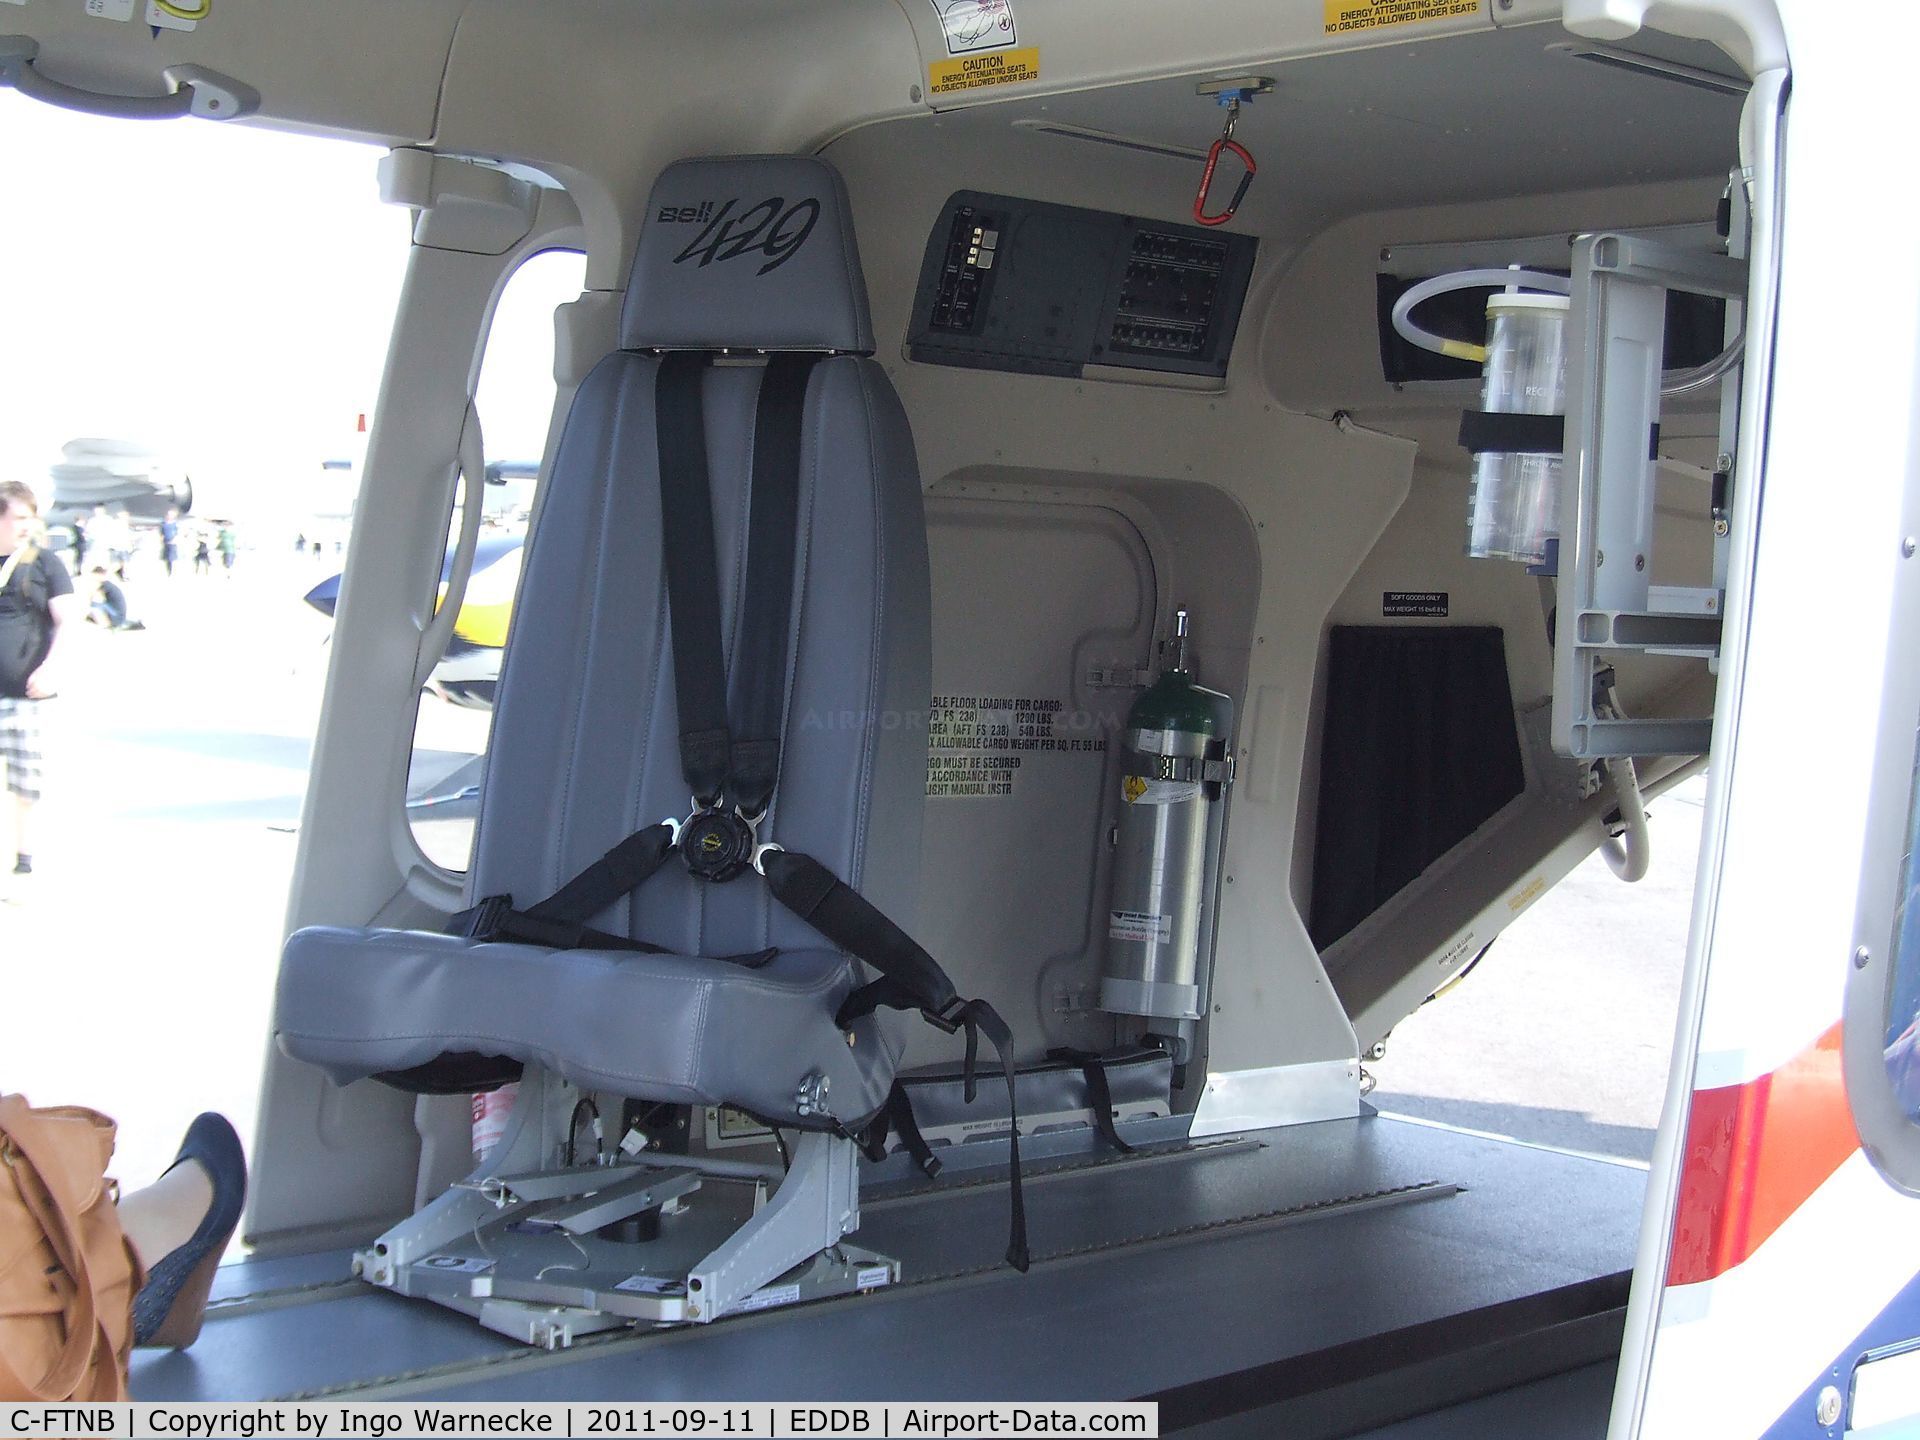 C-FTNB, 2008 Bell 429 GlobalRanger C/N 57002, Bell 429 in EMS configuration at the ILA 2012, Berlin  #i